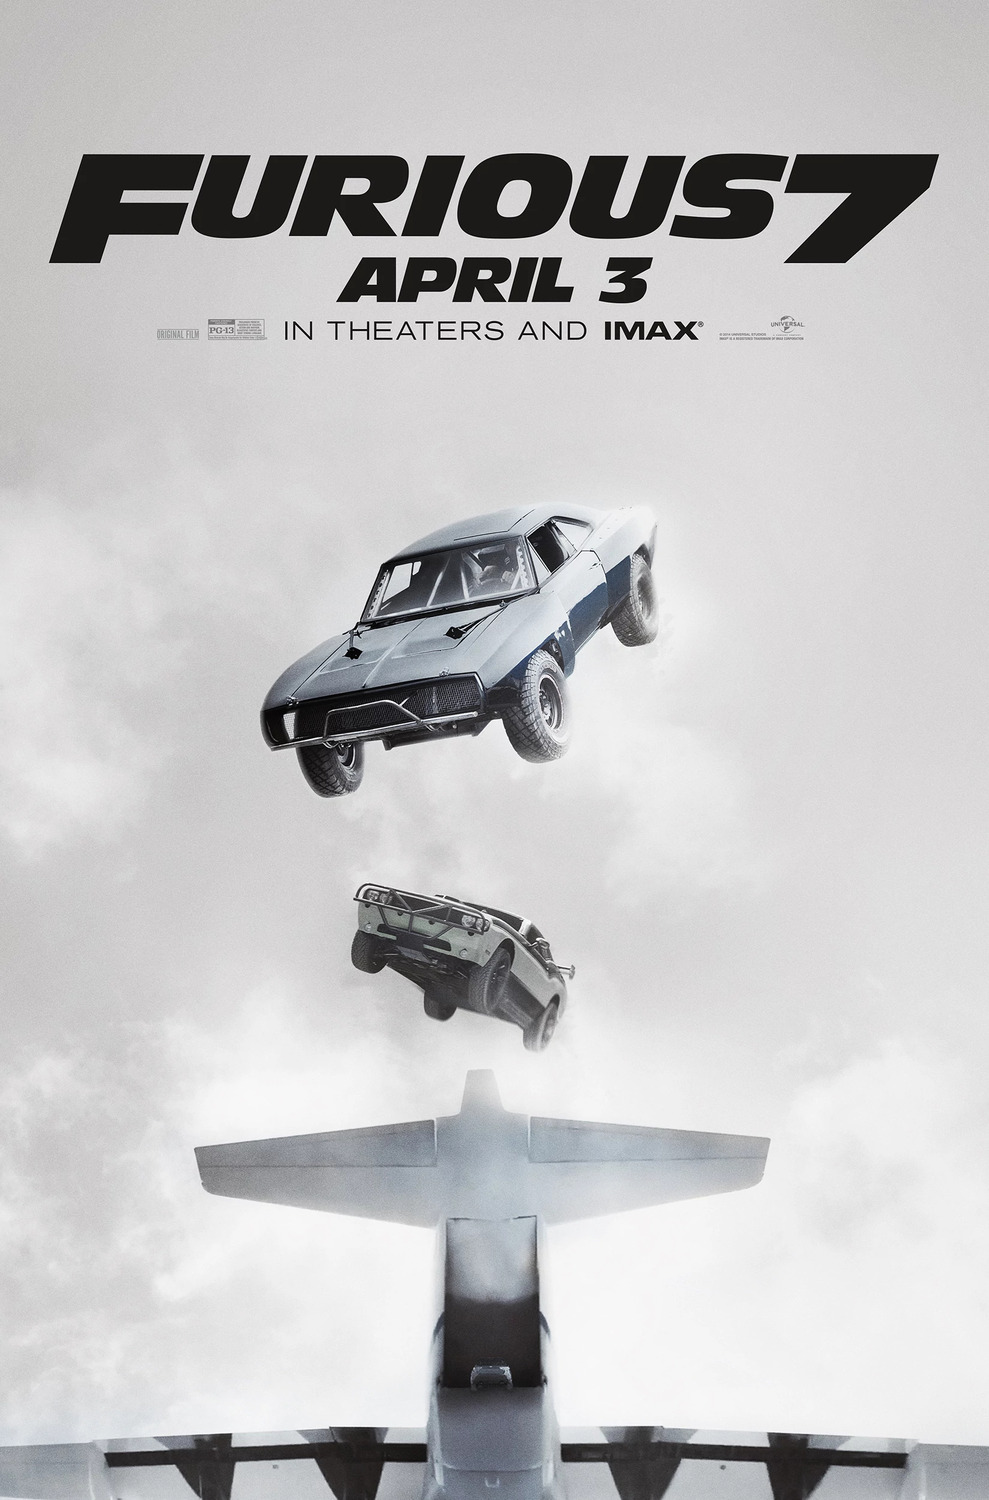 Extra Large Movie Poster Image for Furious 7 (#5 of 6)